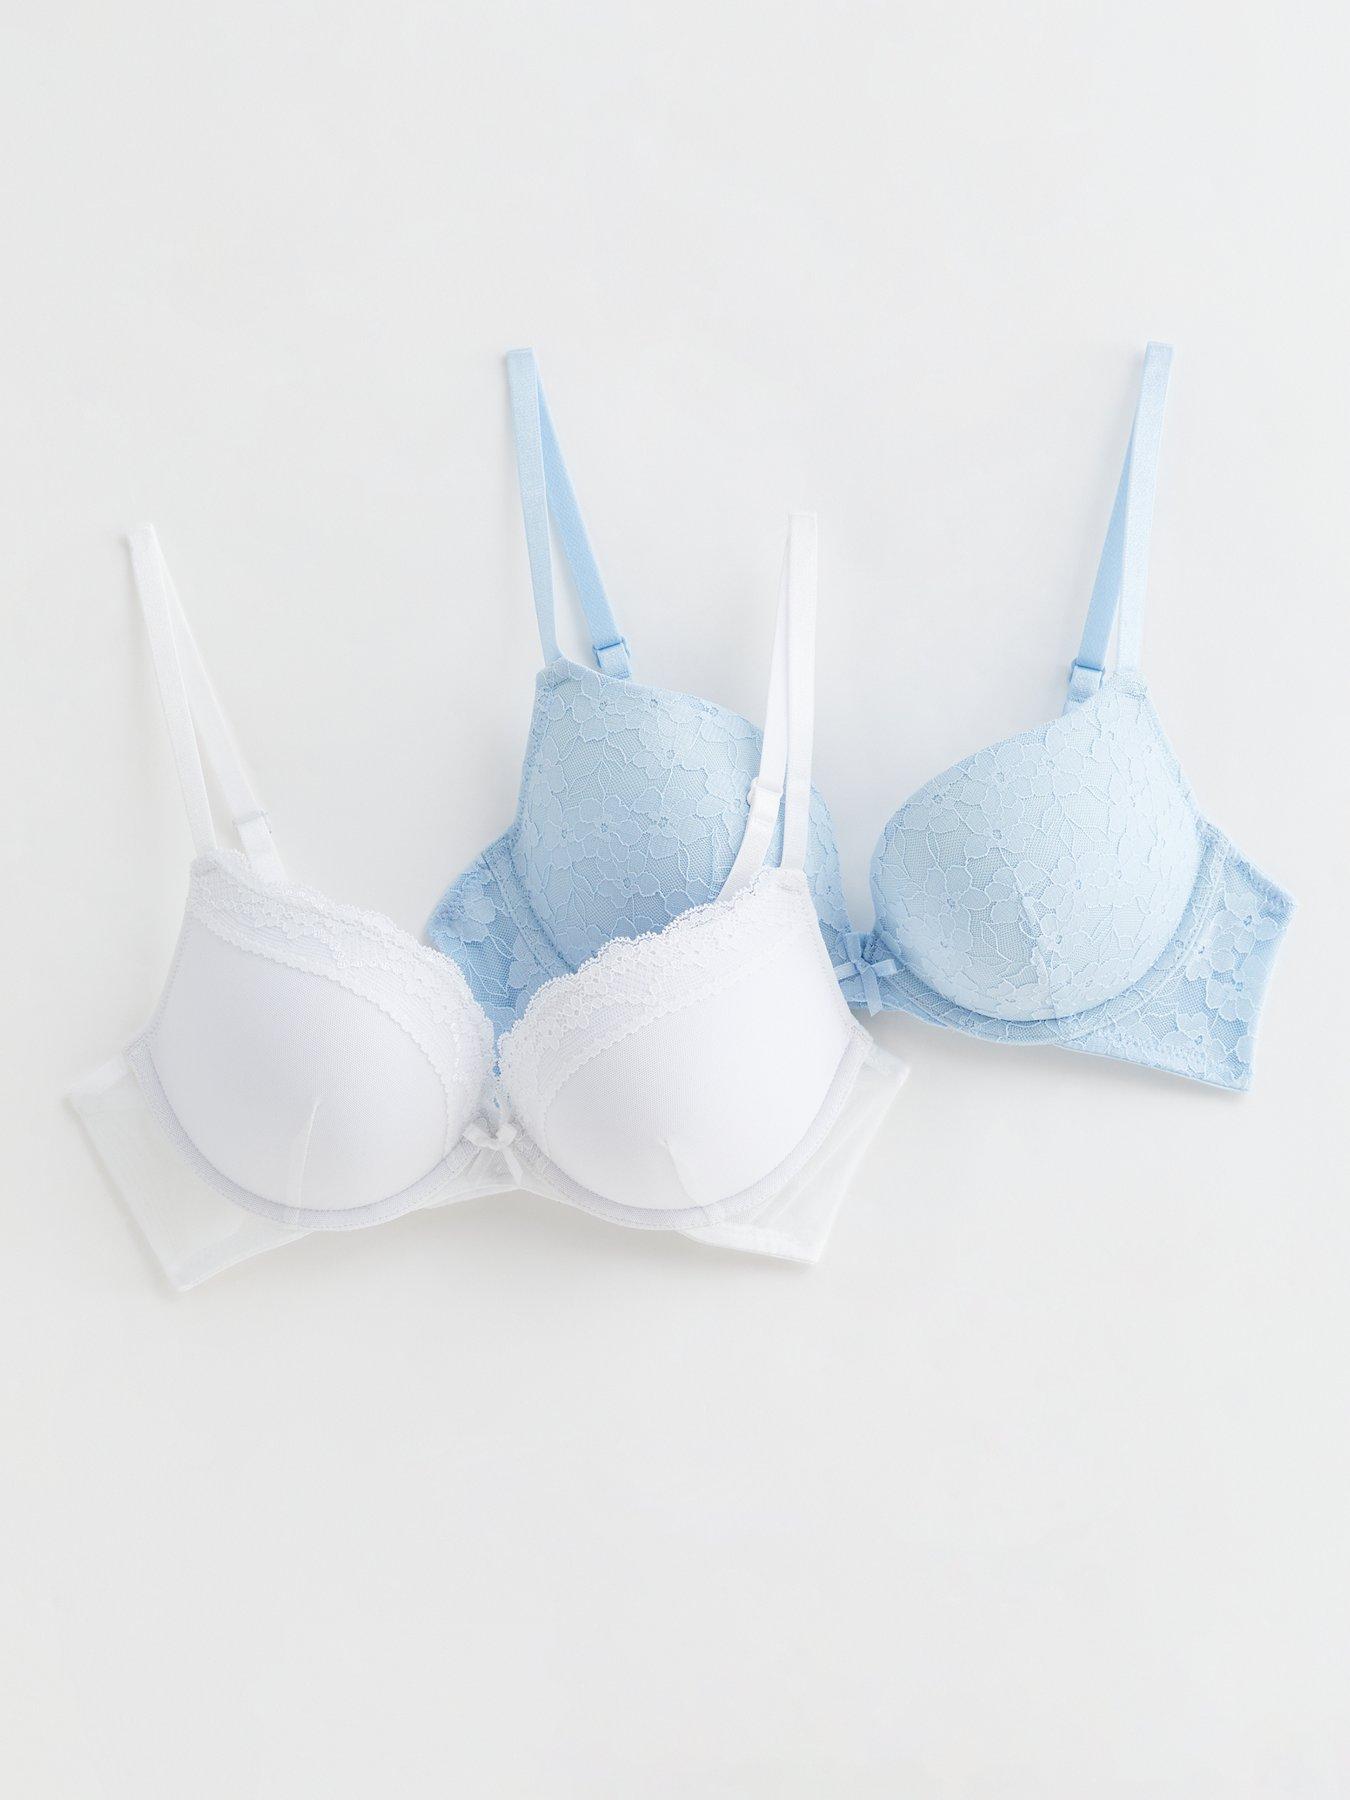 https://media.littlewoods.com/i/littlewoods/VTKSF_SQ1_0000000150_LIGHT_BLUE_MDf/new-look-2-pack-blue-and-white-lace-push-up-bras.jpg?$180x240_retinamobilex2$&$roundel_littlewoods$&p1_img=new_yellow_round